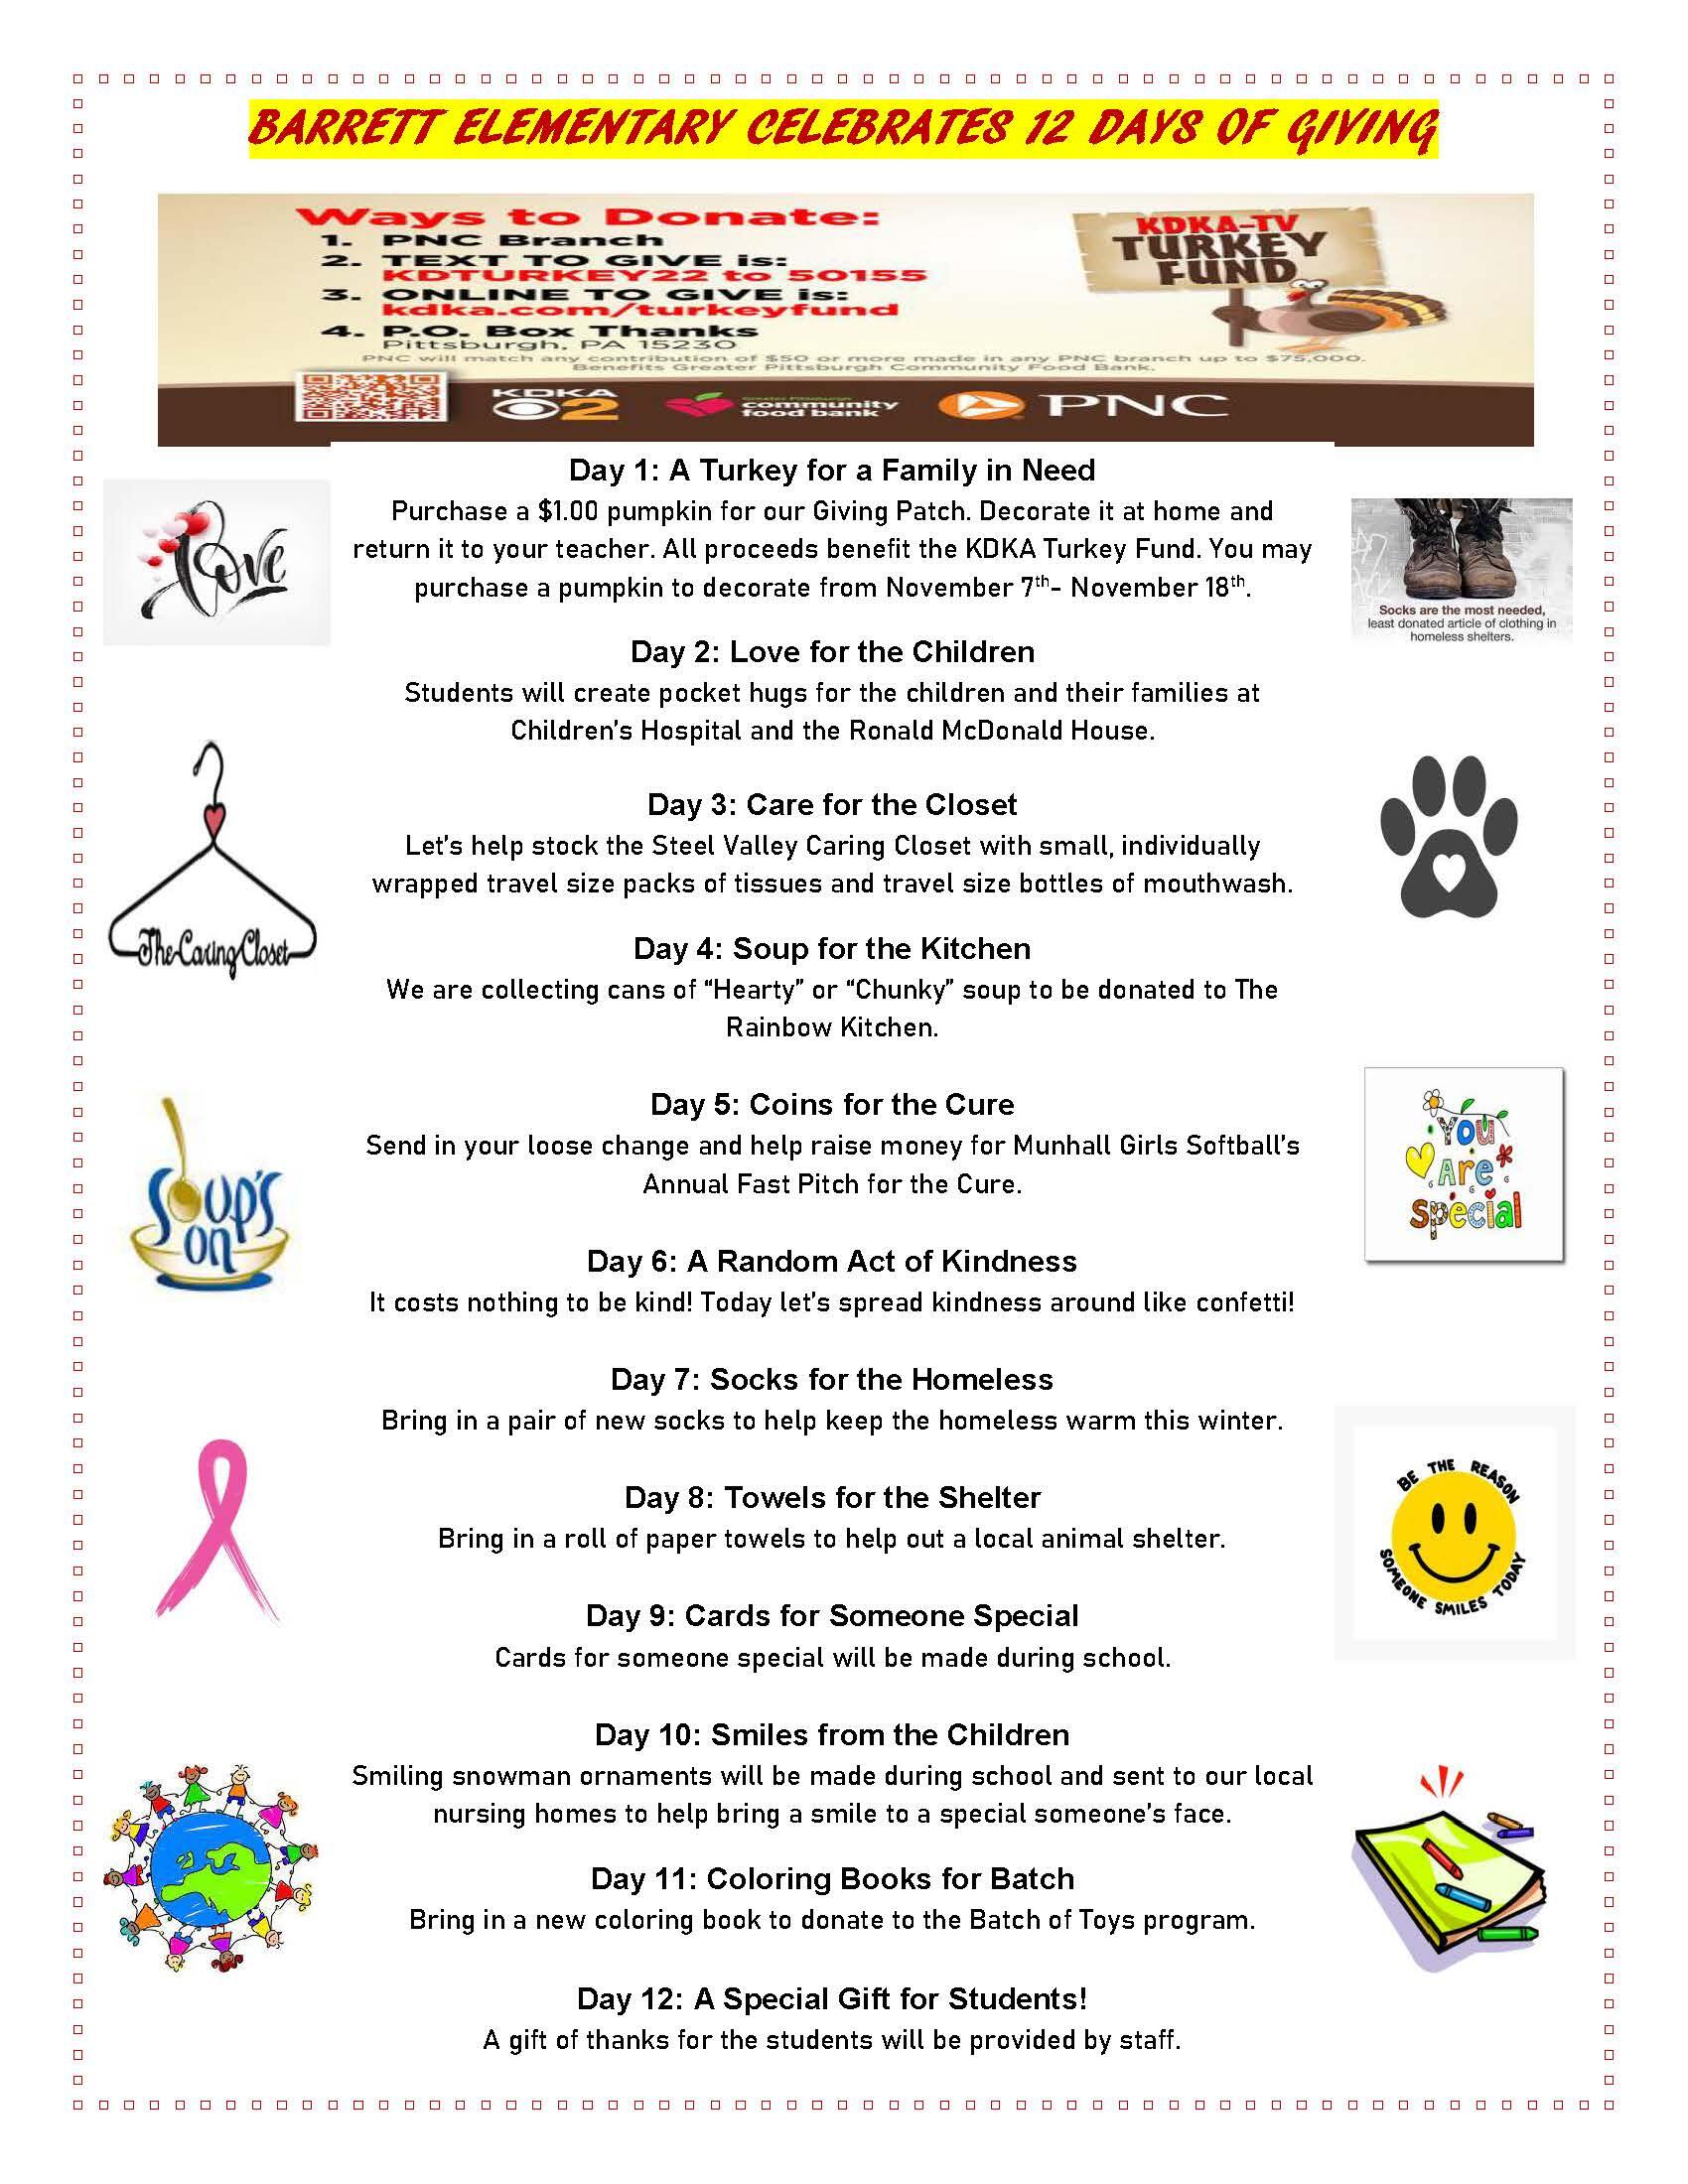 An image advertising the details of each day of donation of Barrett Elementary's 12 Days of Giving, running from Nov. 7 to Nov. 12